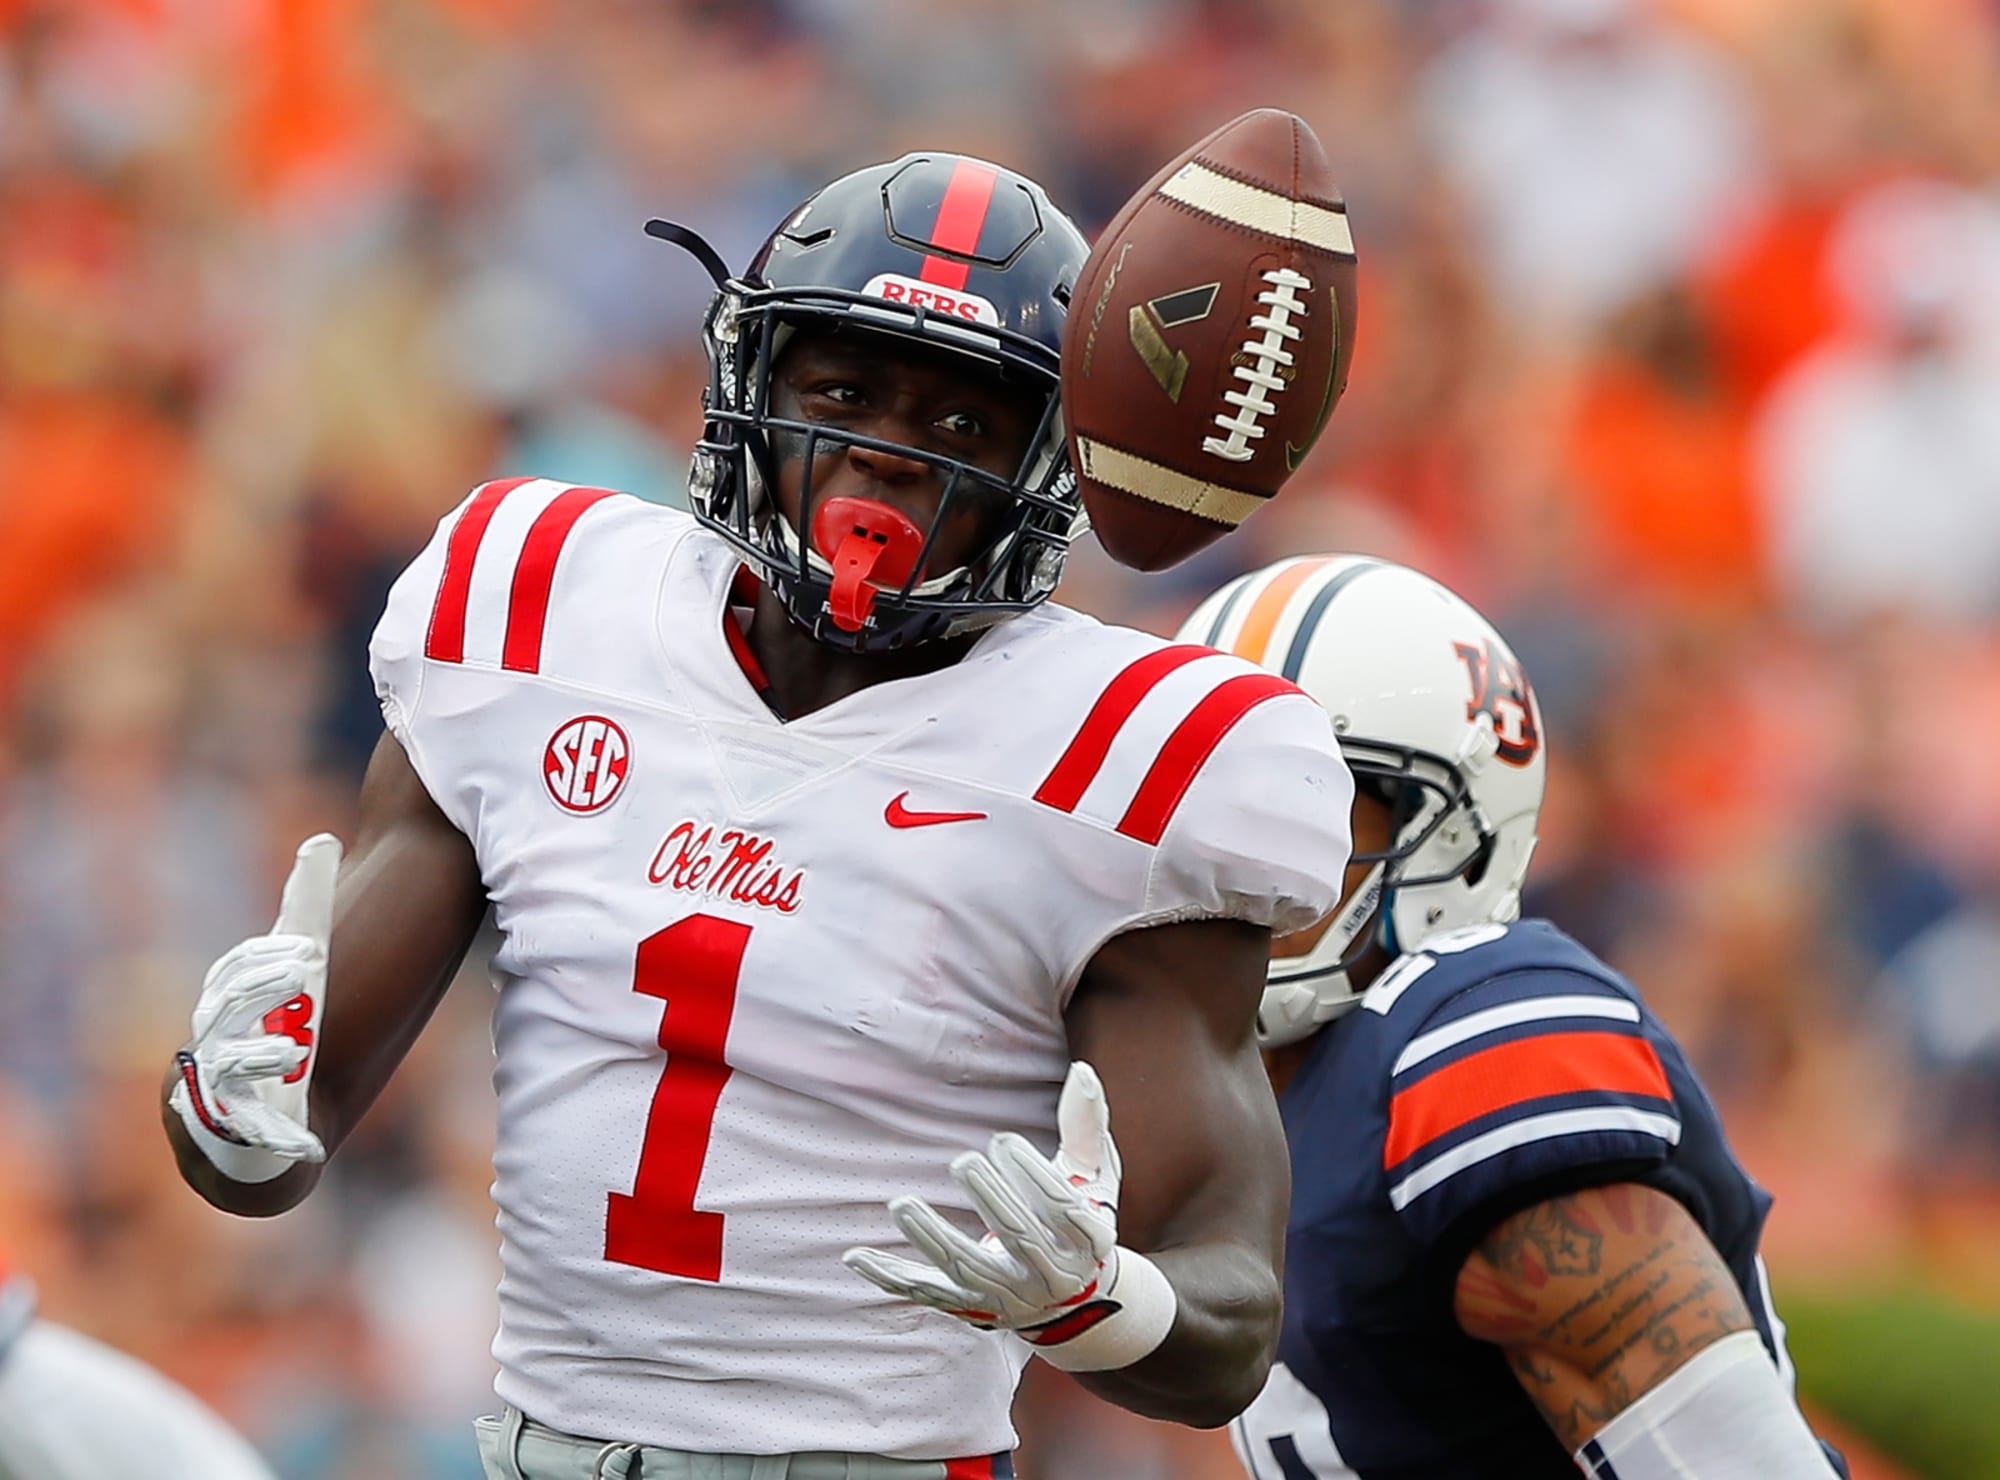 Ole Miss Football: Rebels Get Tough Match-up With Auburn ...